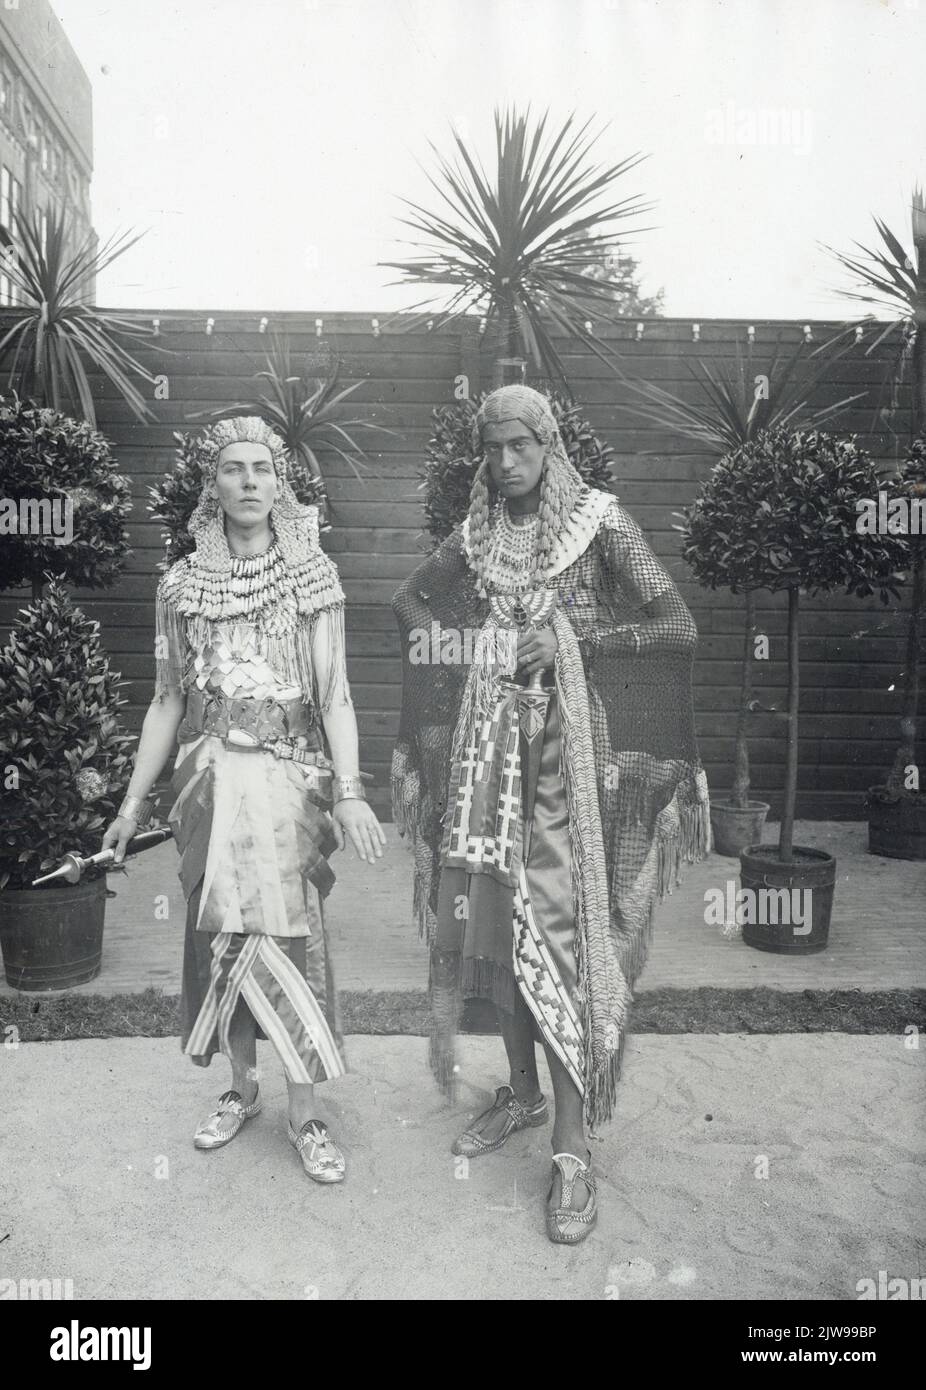 Portrait of an unknown person and prince Toetanchamon (right), presented by C. Bos, one of the main characters in the anniversary game and the masquerade parade on the occasion of the 58th anniversary (290th anniversary) of the University in Utrecht with the theme of Ichnaton. Stock Photo